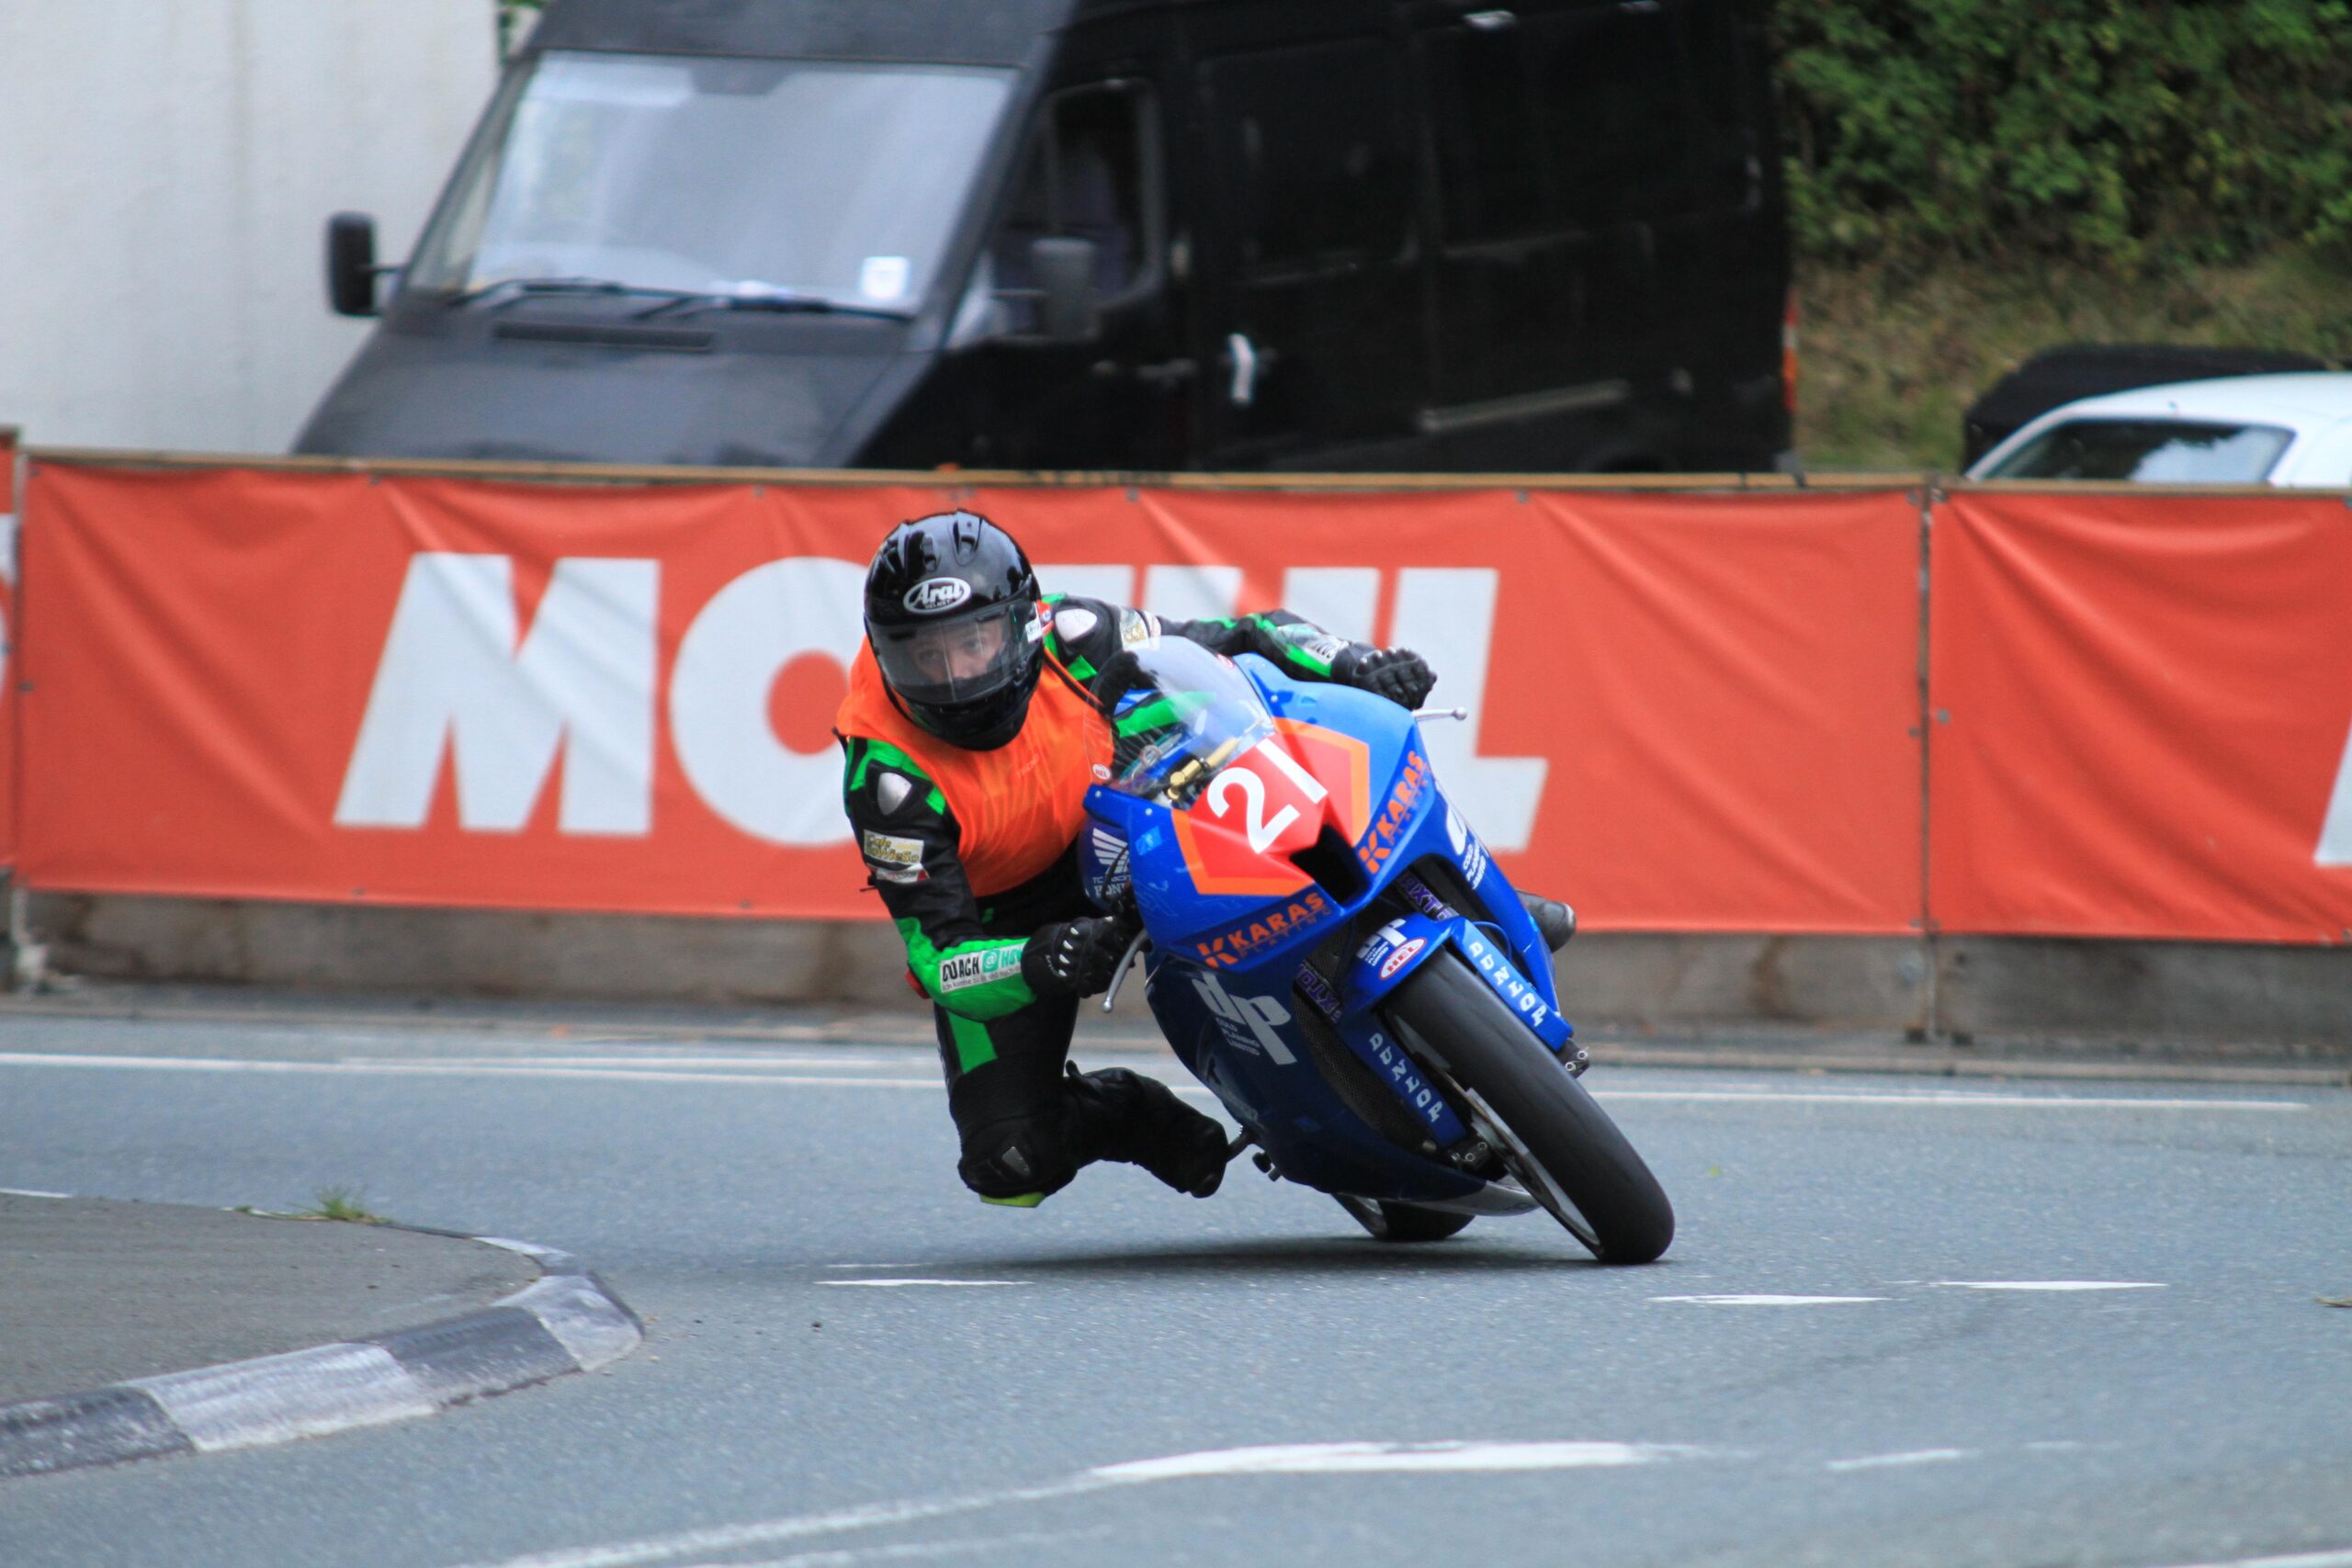 Manx Grand Prix 2016 – Thursday Newcomers Practice Report